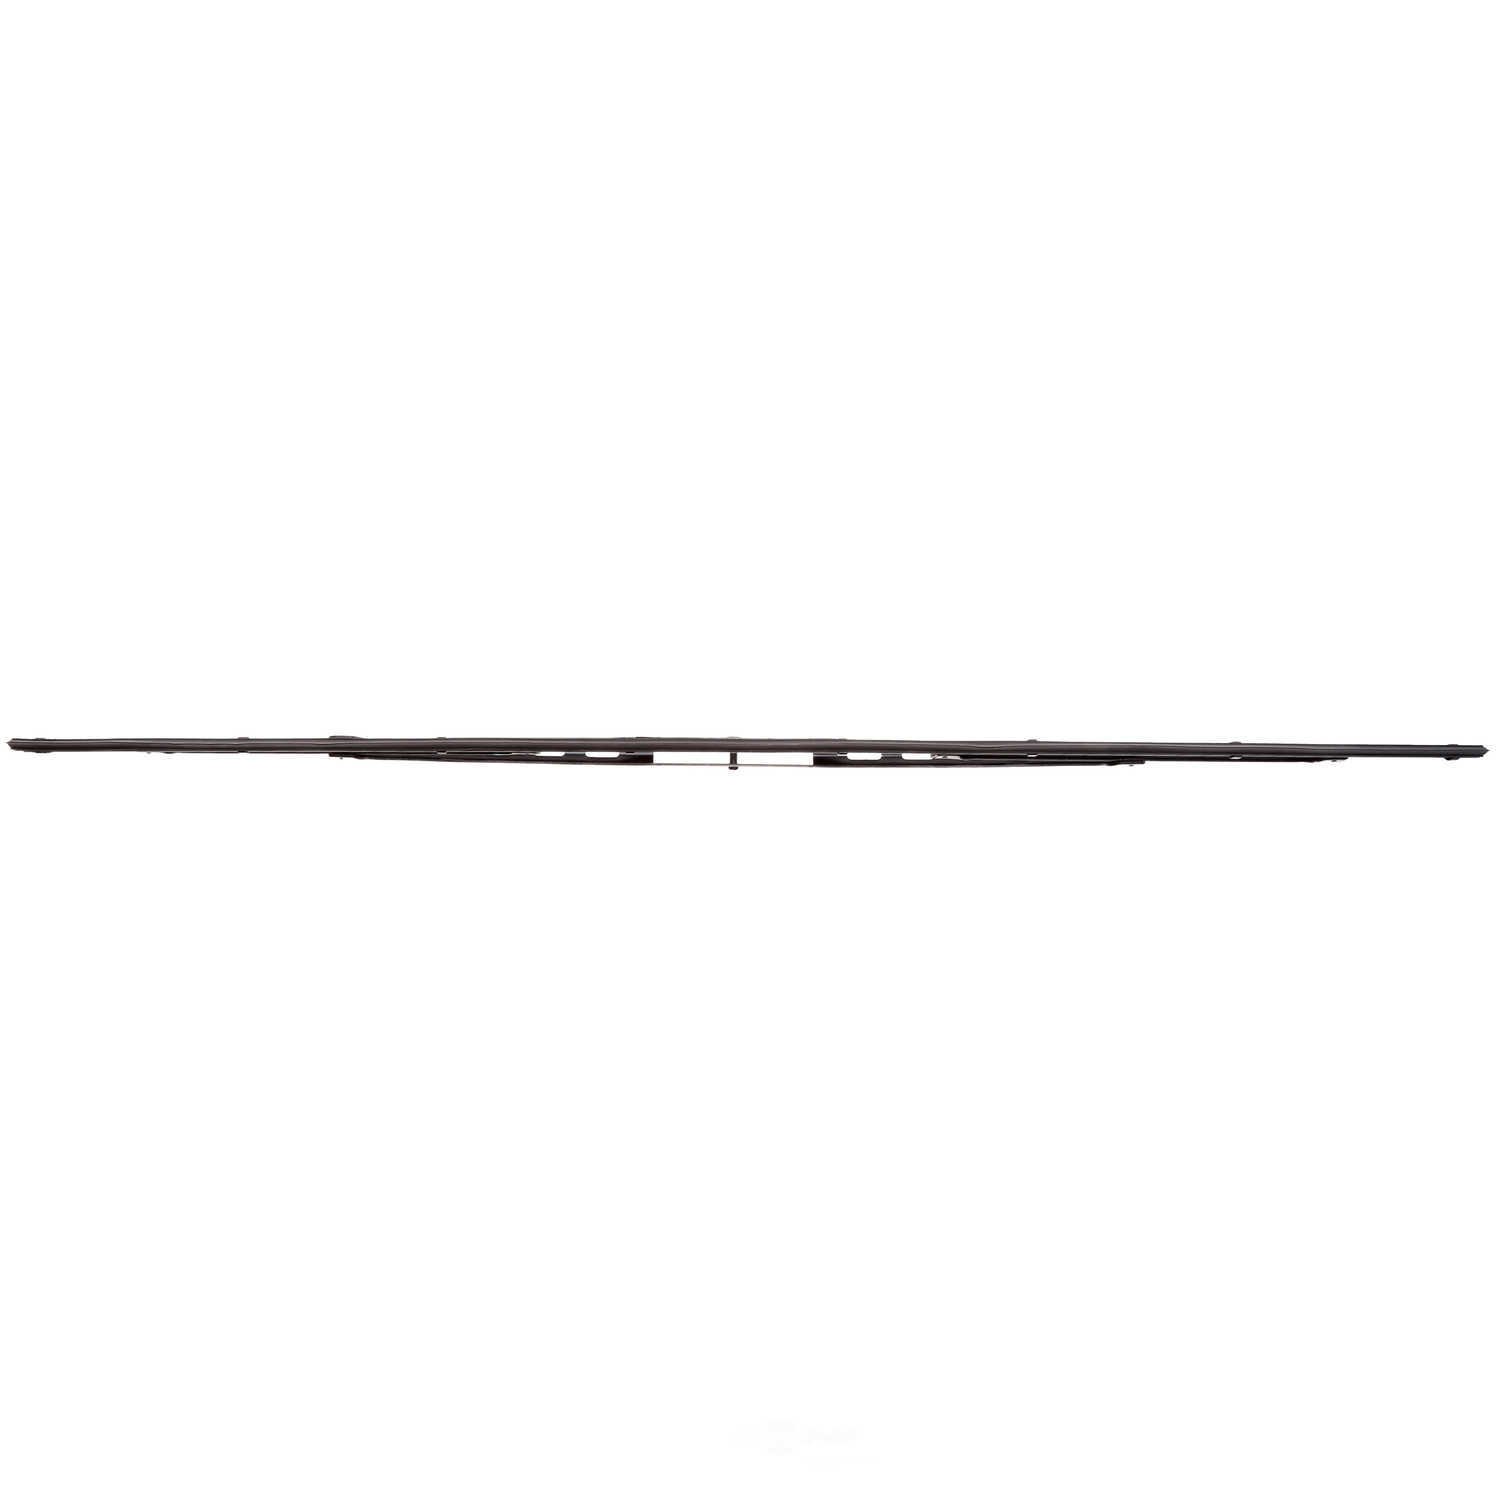 ANCO WIPER PRODUCTS - ANCO 31-Series Wiper Blade (Front Left) - ANC 31-28